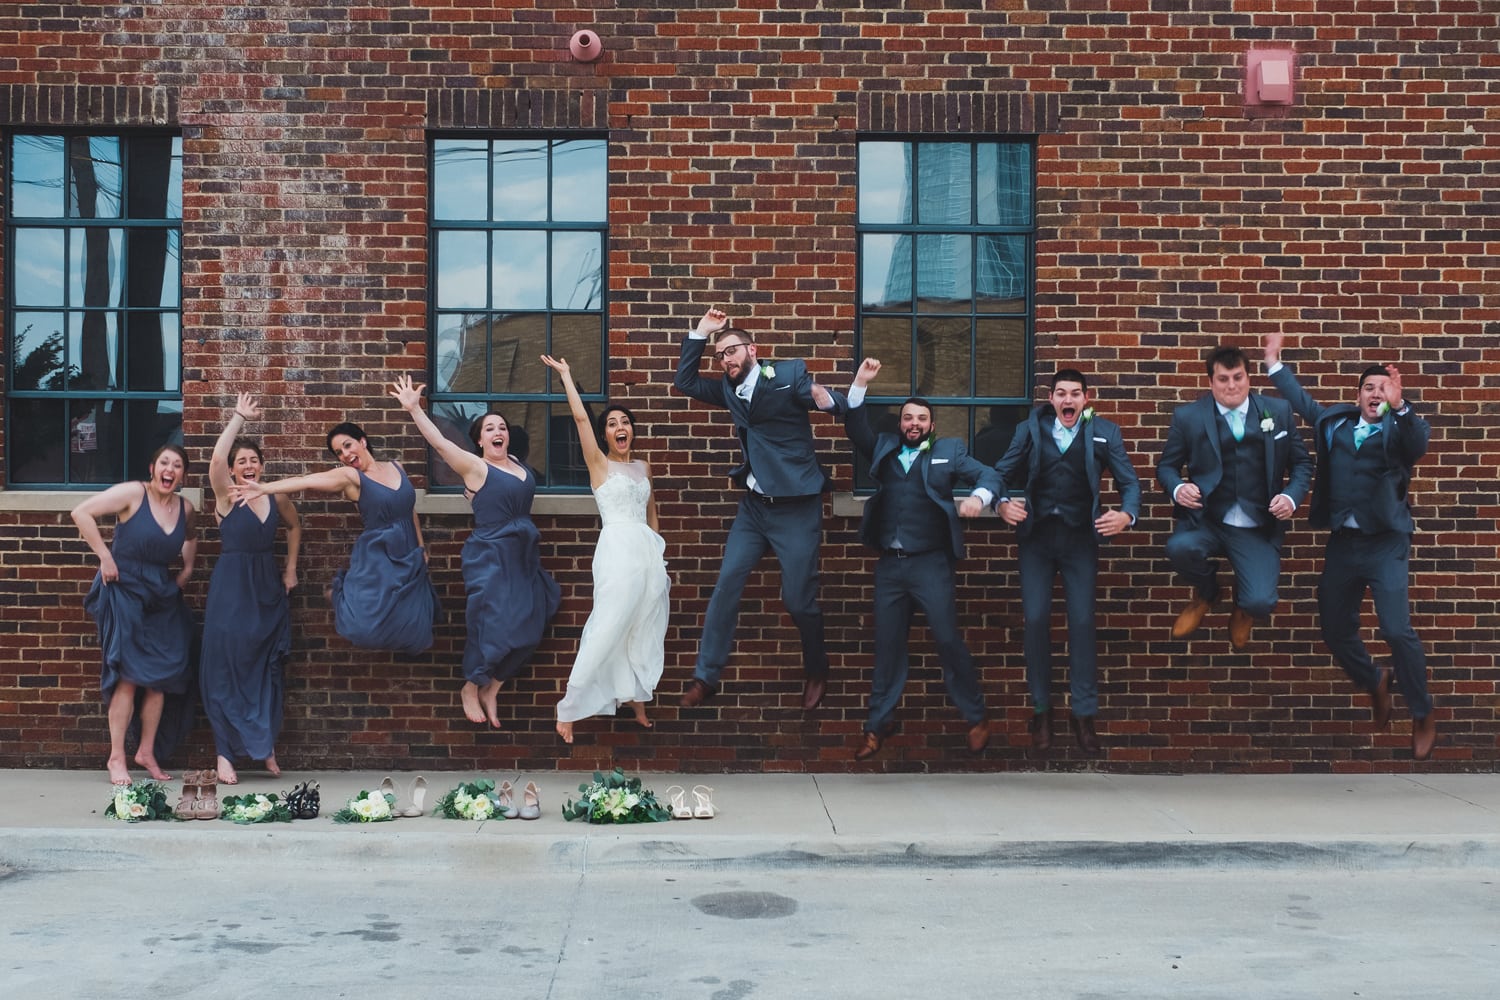 Isabel Orozco Moore and John Moore wedding party in Film Row in Oklahoma City // Photo by Leia Smethurst